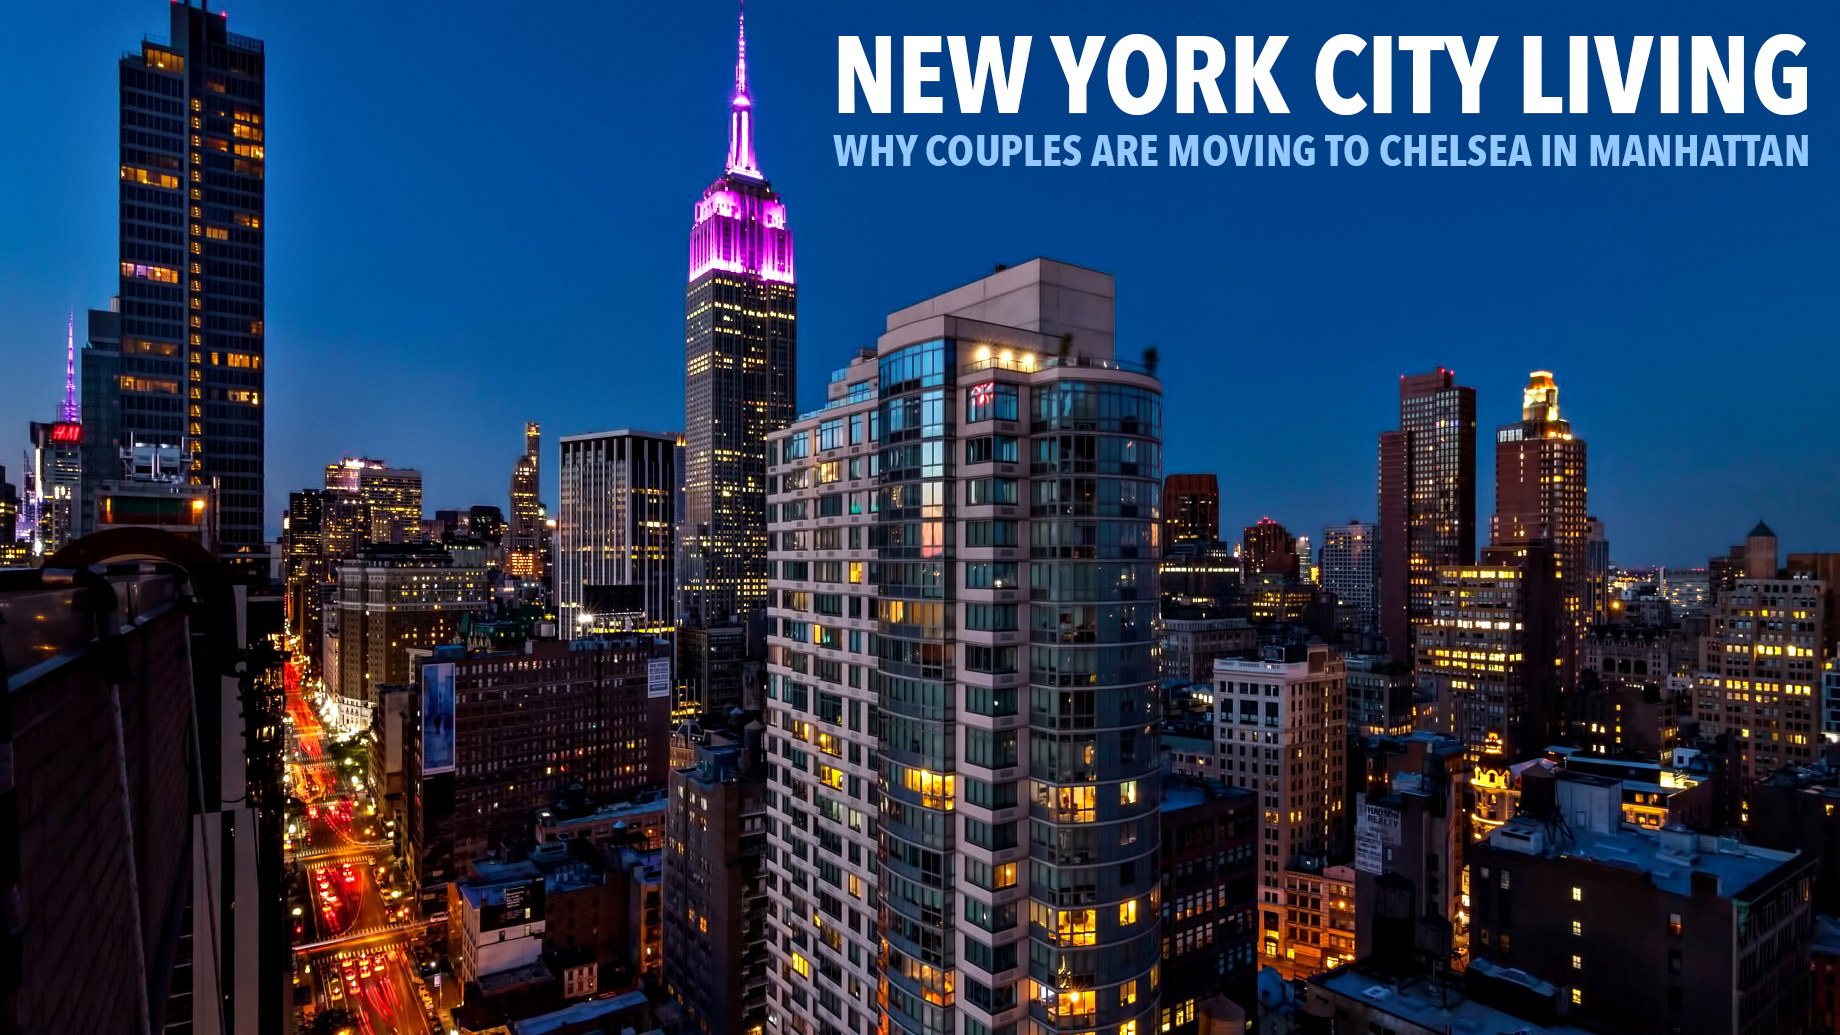 New York City Living – Why Couples Are Moving to Chelsea in Manhattan